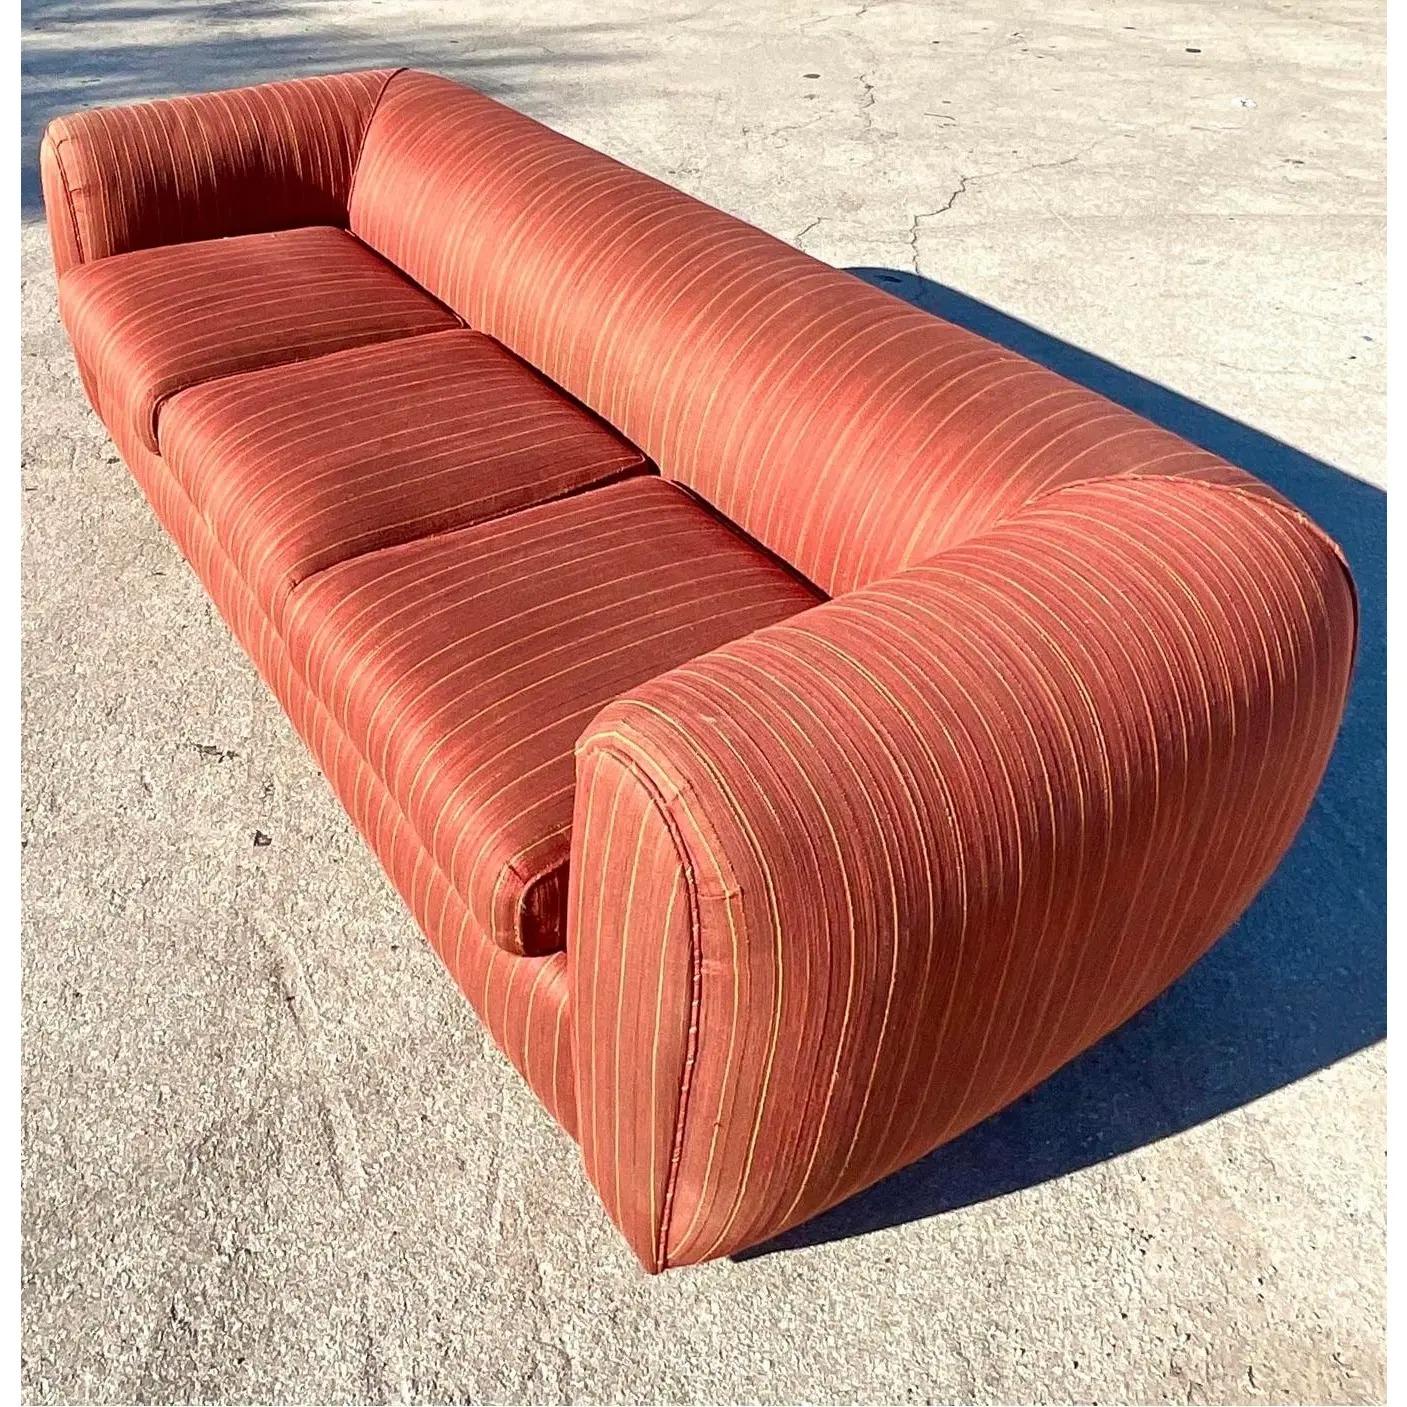 A fantastic vintage Postmodern sofa. A beautiful overstuffed roll arm and hidden seam detail. Perfect as is or recover in a chic mohair. The shape is just amazing. Matching lounge chair also available. Acquired from a Palm Beach estate.